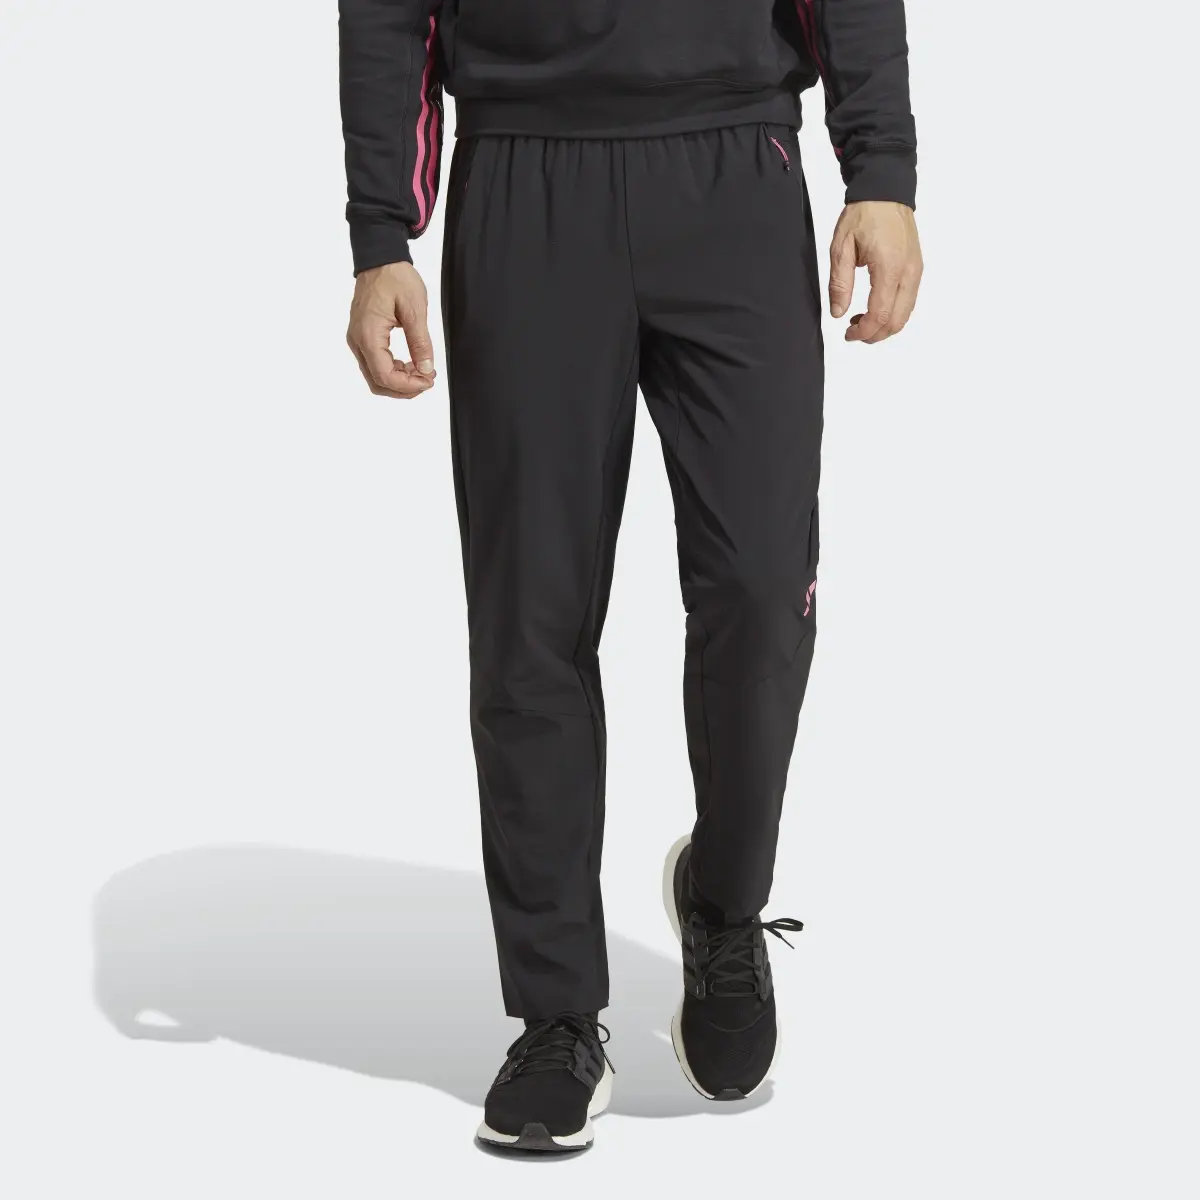 Adidas Pantalon HIIT Curated By Cody Rigsby. 1